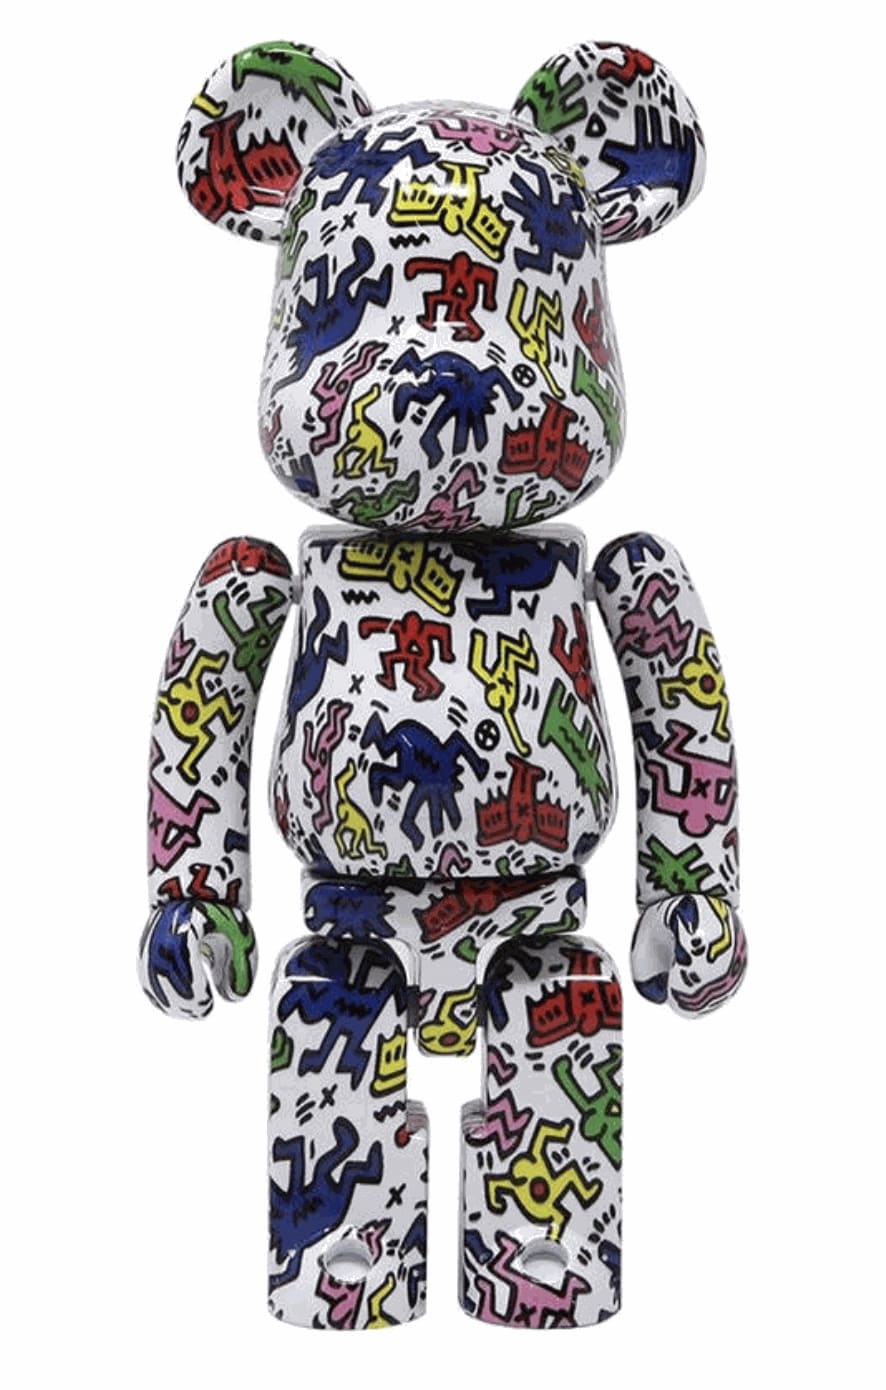 BEARBRICK X KEITH HARING 200%, 2021 Painted cast vinyl from 5Art Gallery